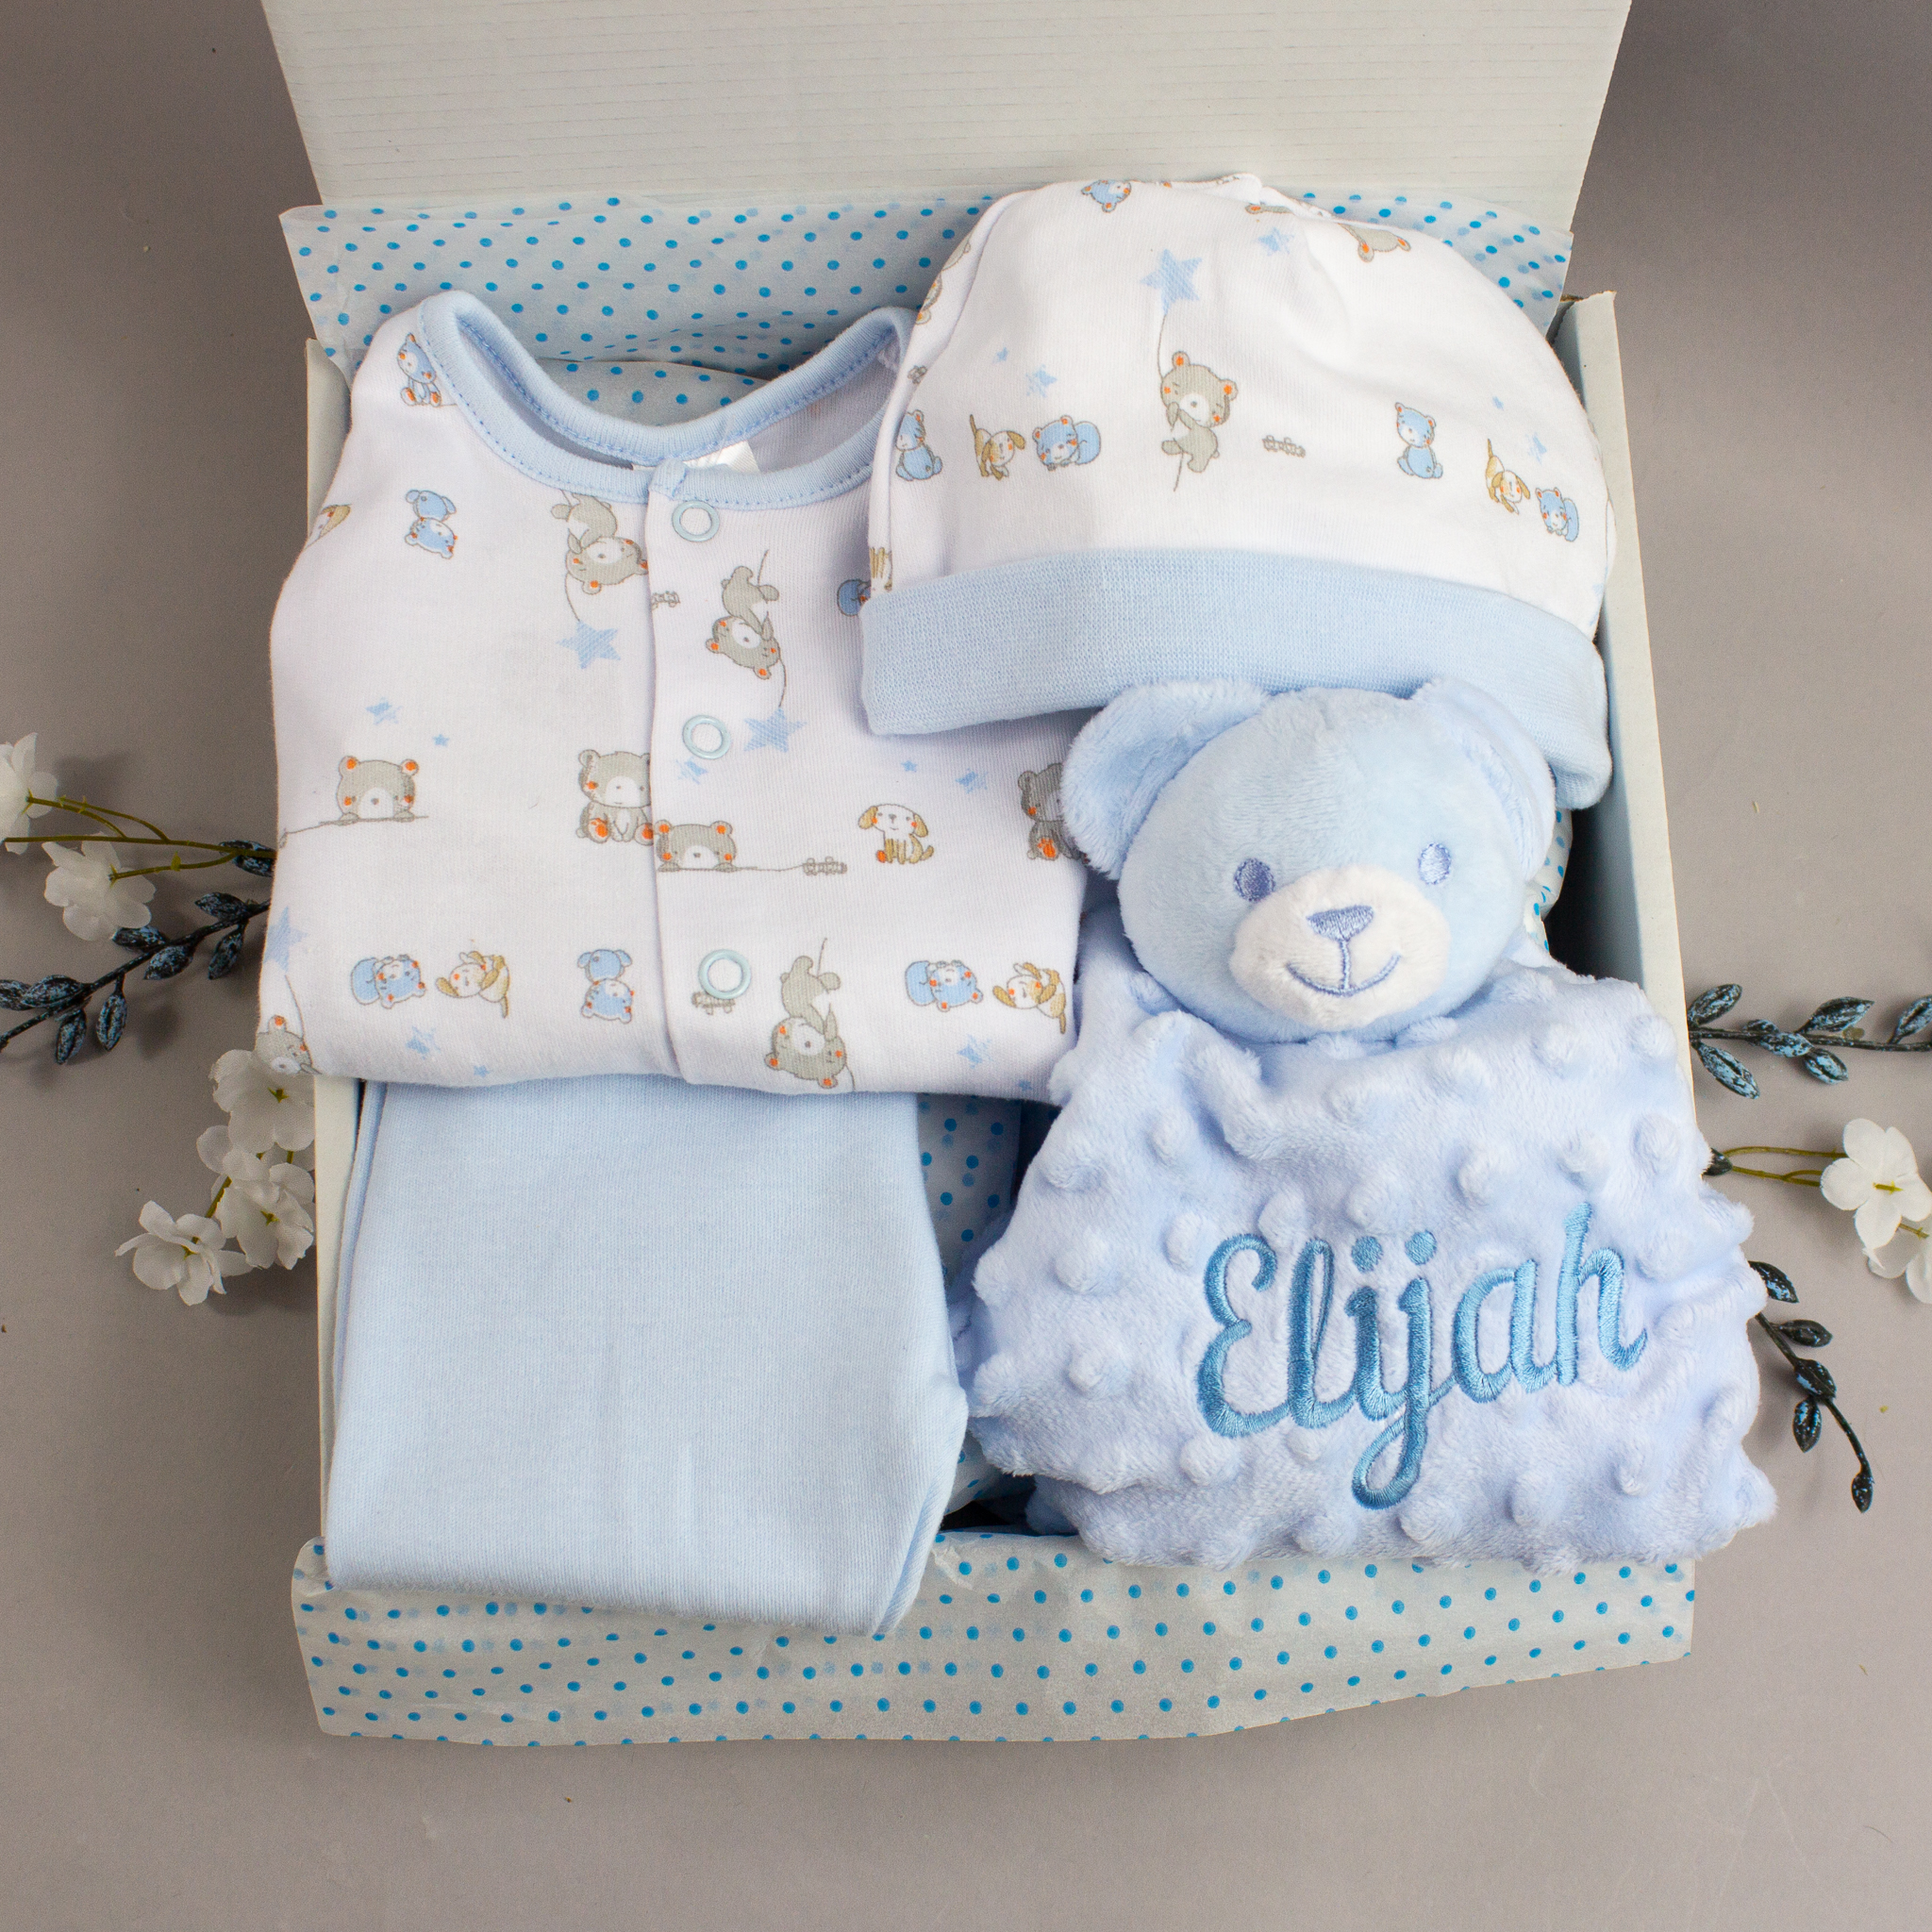 Clothing Boys Clothing Baby Boys Clothing Clothing Sets Blue Baby Gift Hamper Personalised Baby Boy Clothes Gift Set Teddy Bear Gift Basket 